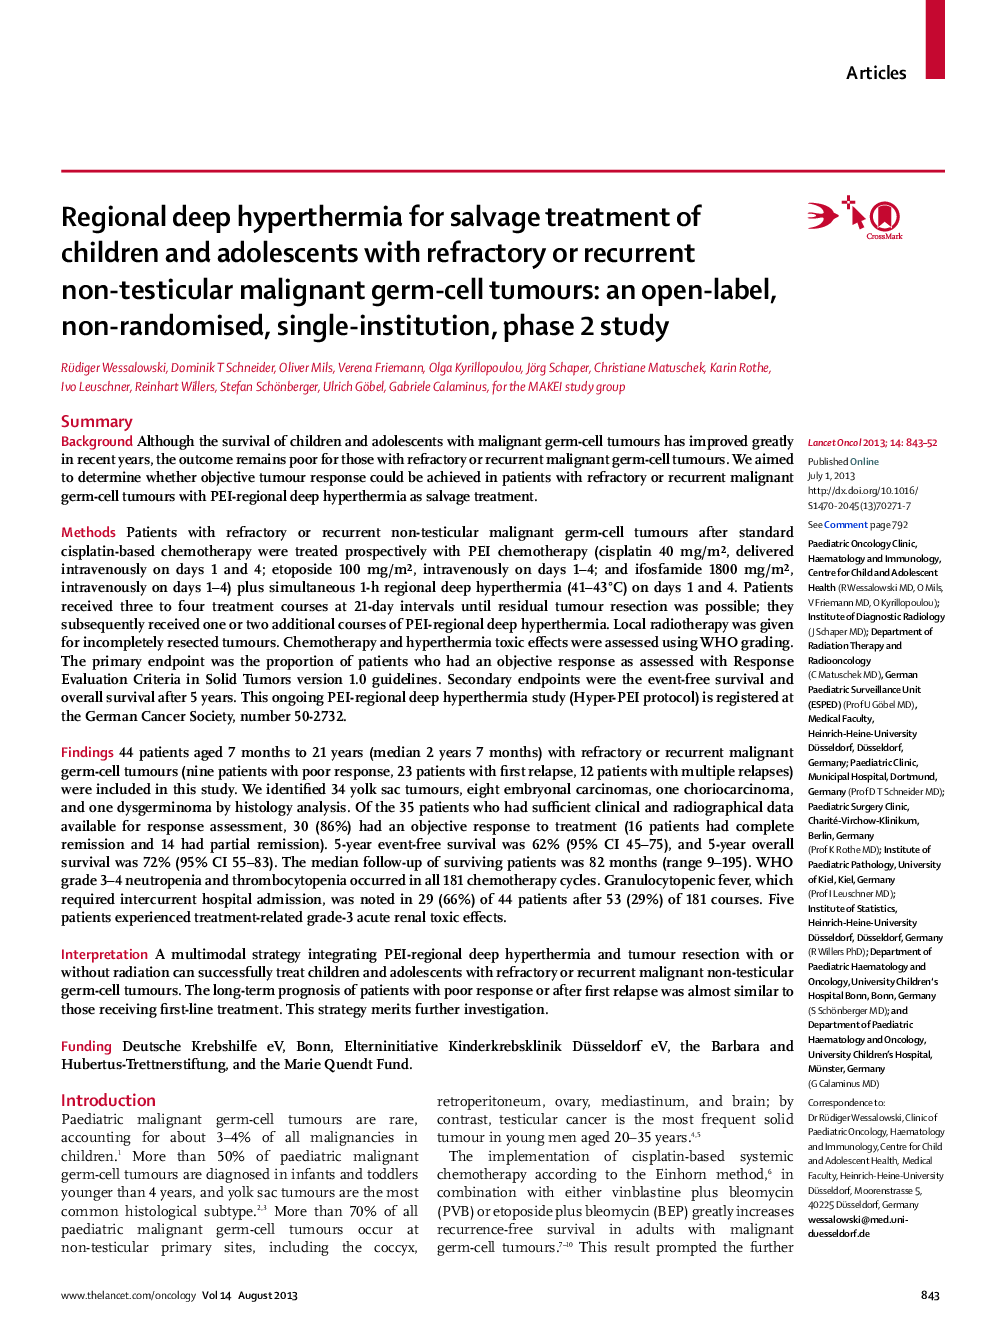 Regional deep hyperthermia for salvage treatment of children and adolescents with refractory or recurrent non-testicular malignant germ-cell tumours: an open-label, non-randomised, single-institution, phase 2 study